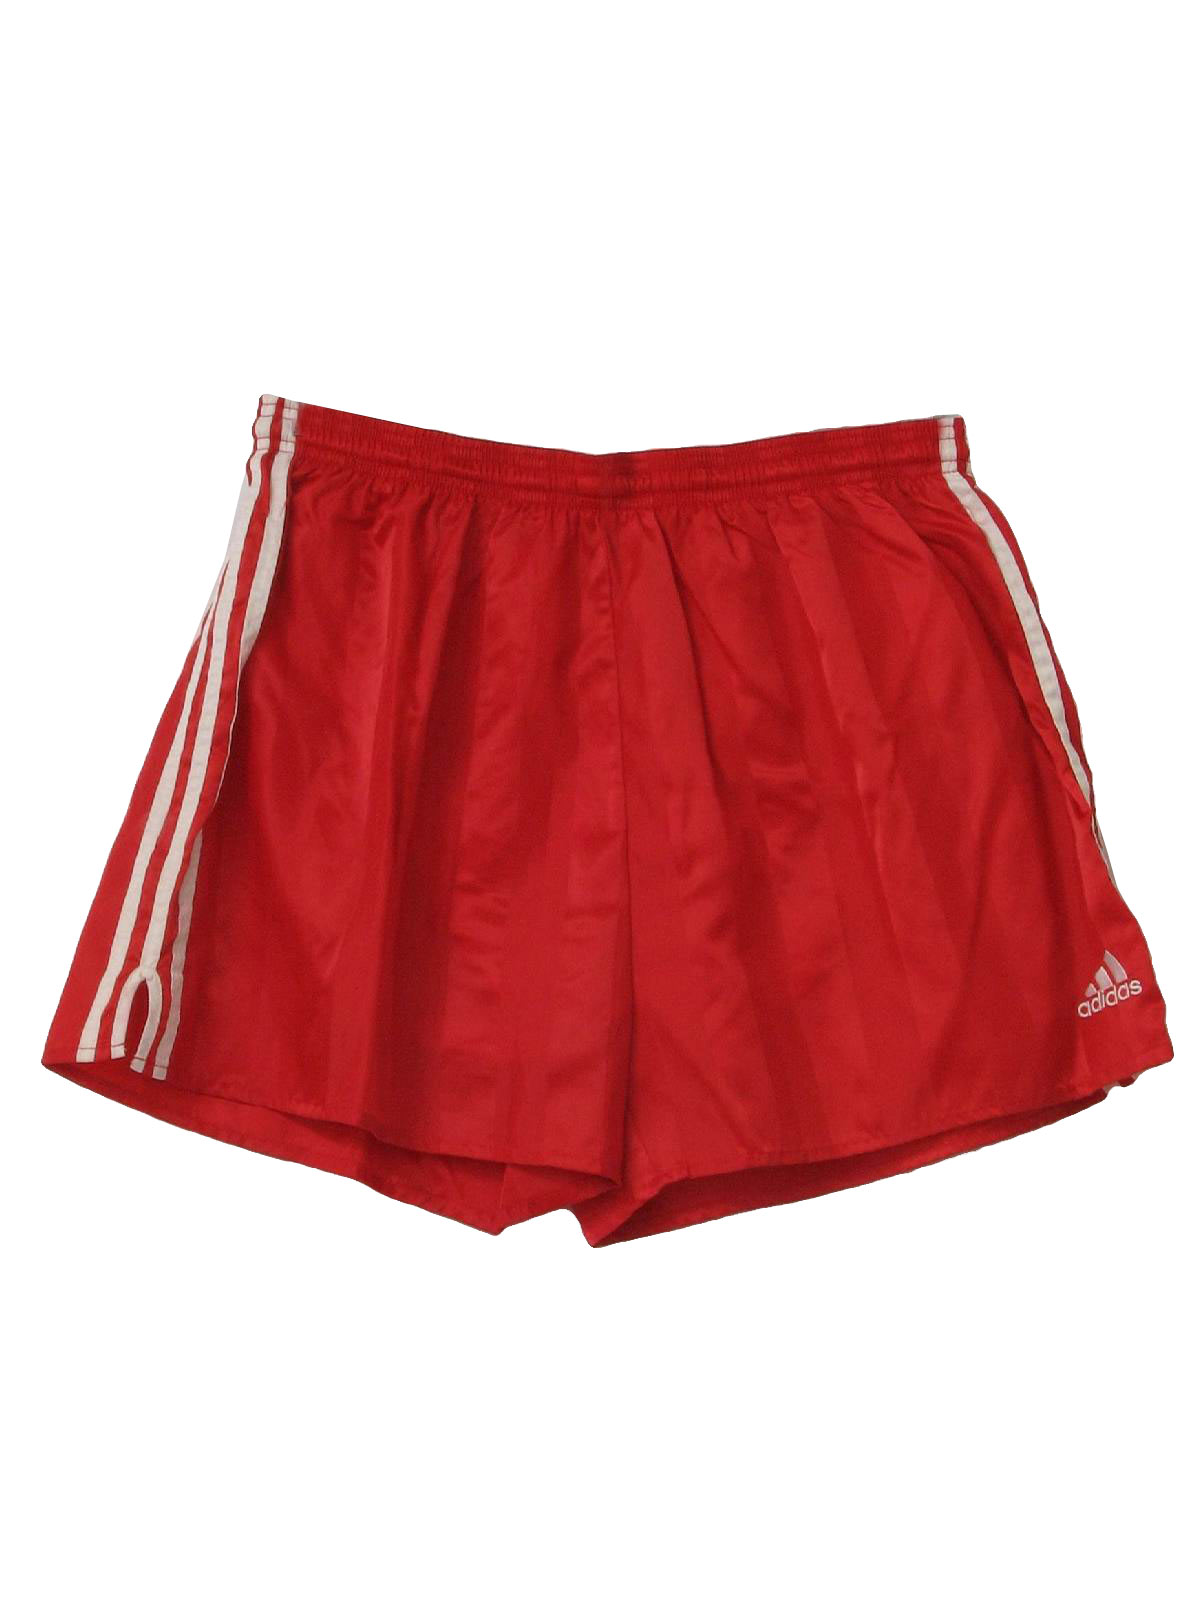 Vintage 1990's Shorts: 90s -Adidas- Mens red on red vertical stripe ...